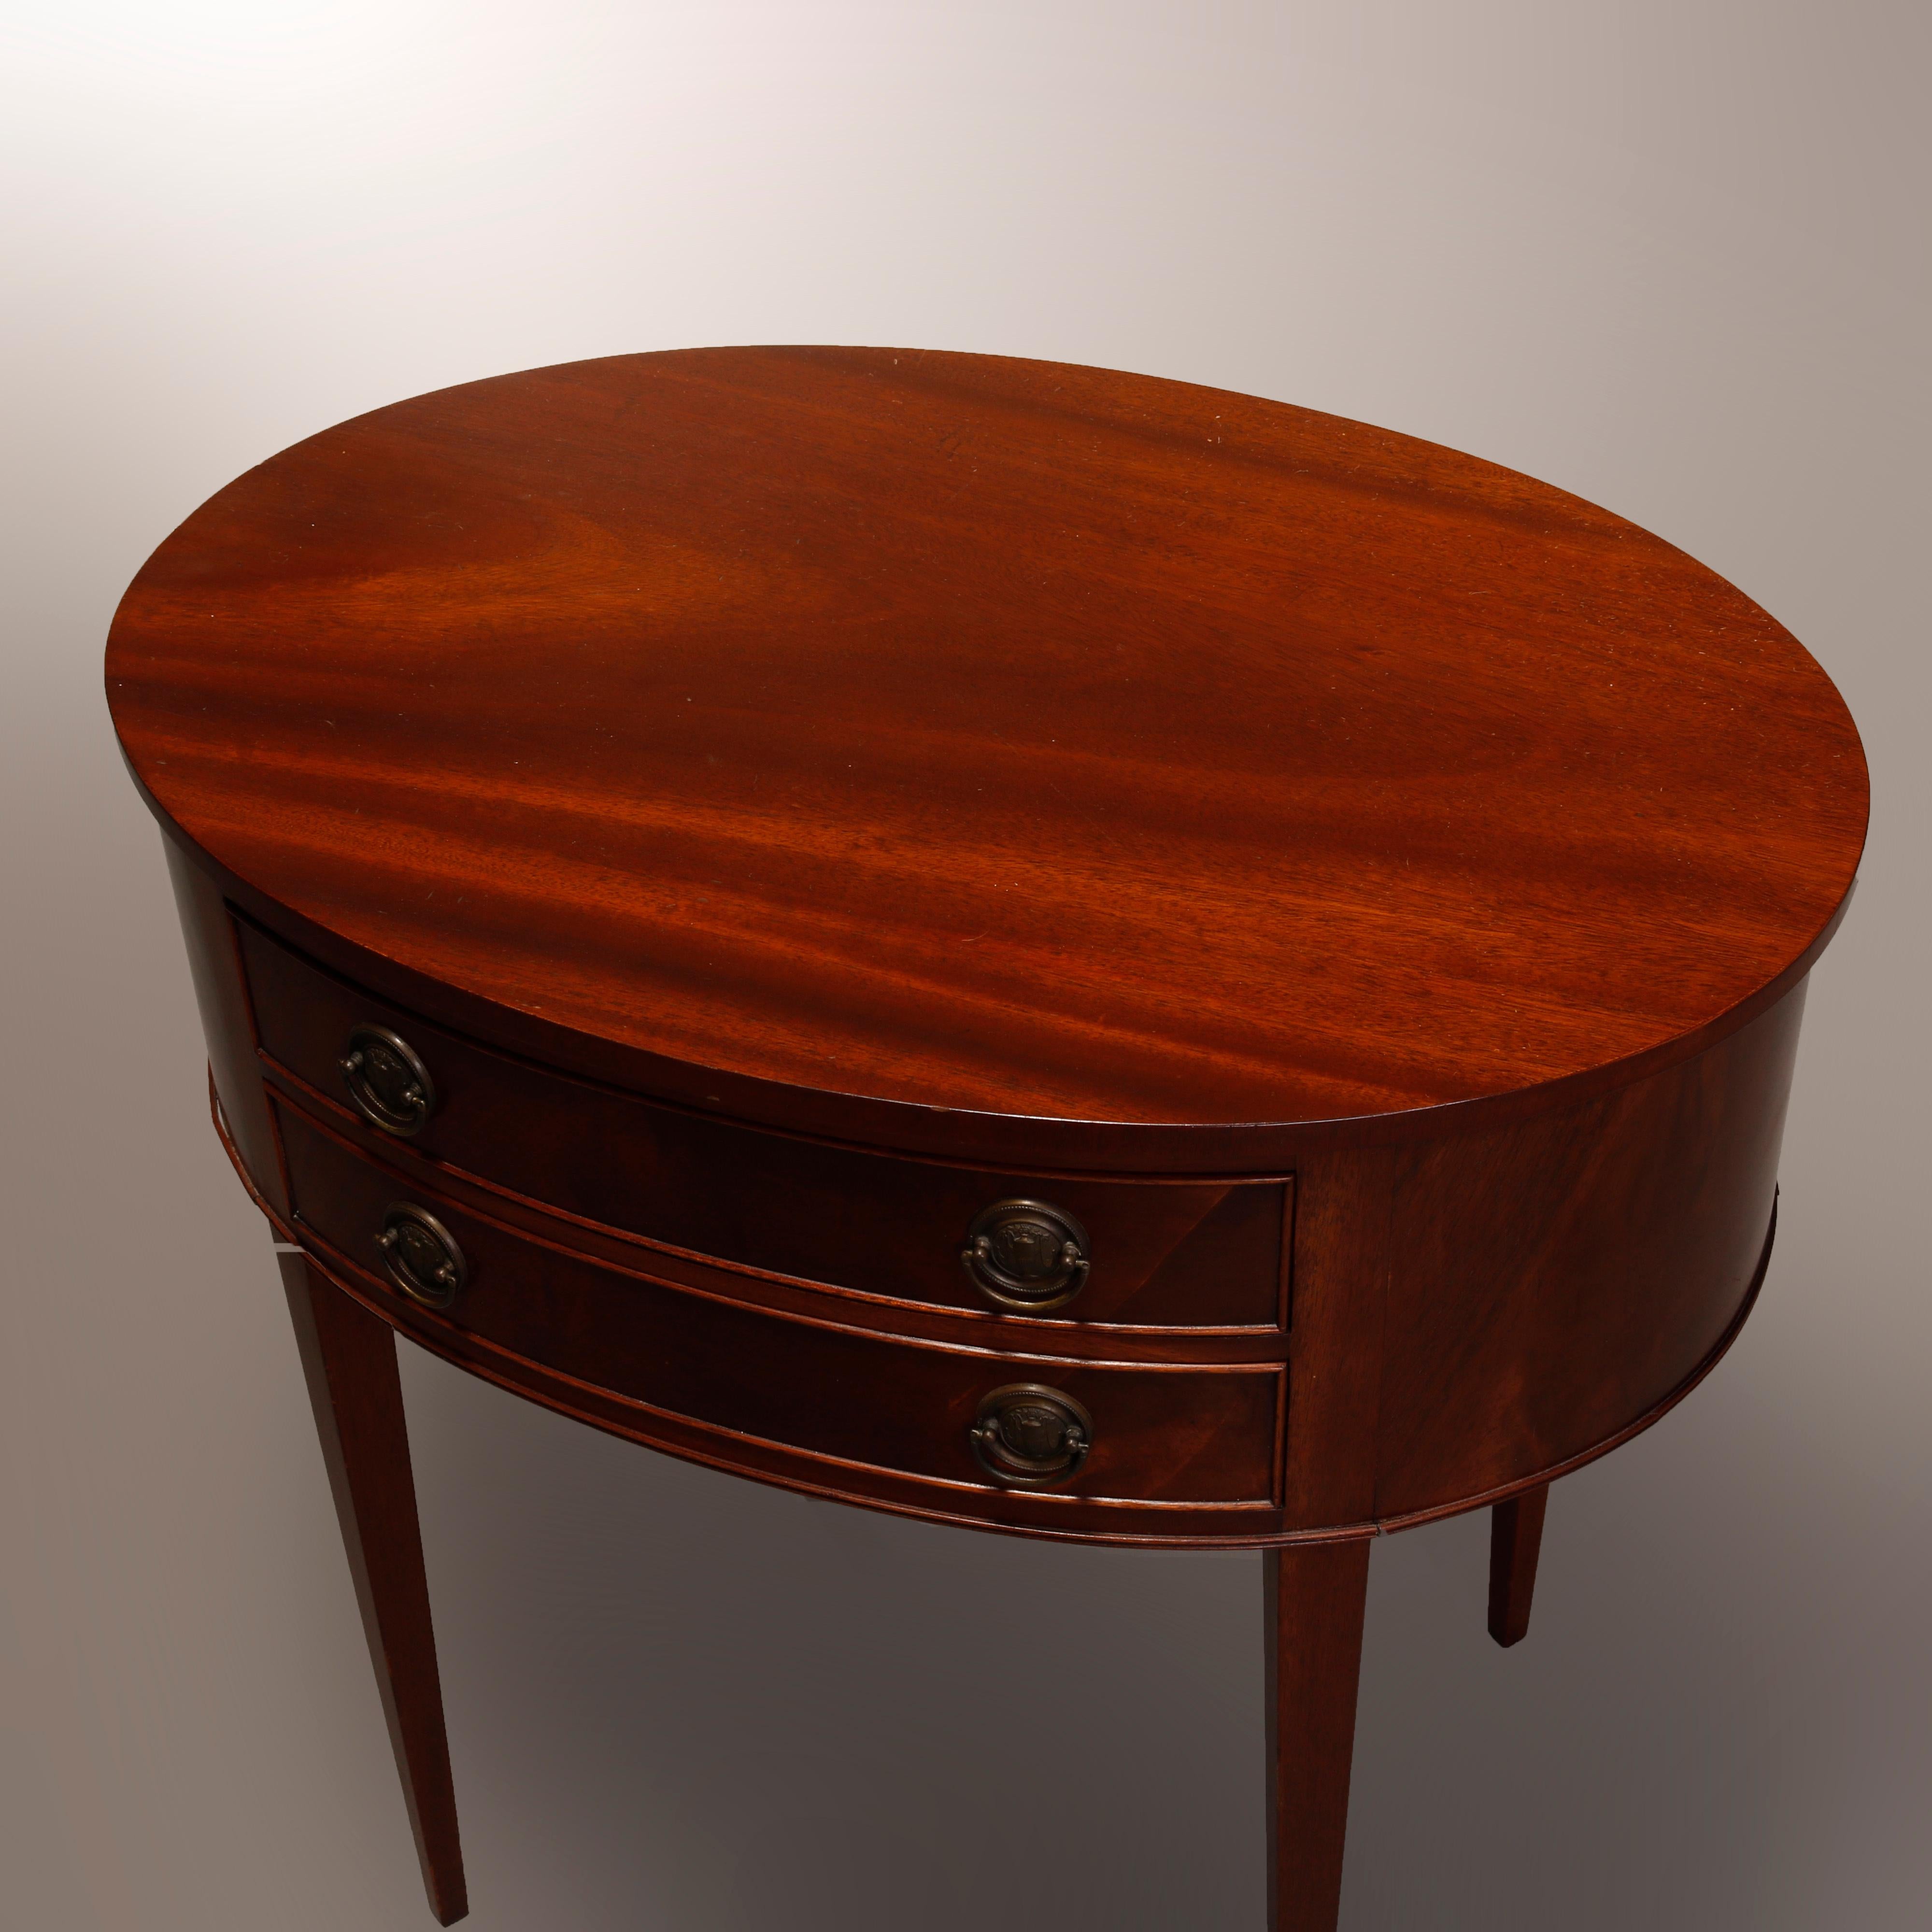 A vintage side table in the manner of Berkey & Gay offers oval form in Hepplewhite style with flame mahogany construction having double drawer case raised on tapered and straight legs, circa 1940

Measures: 27